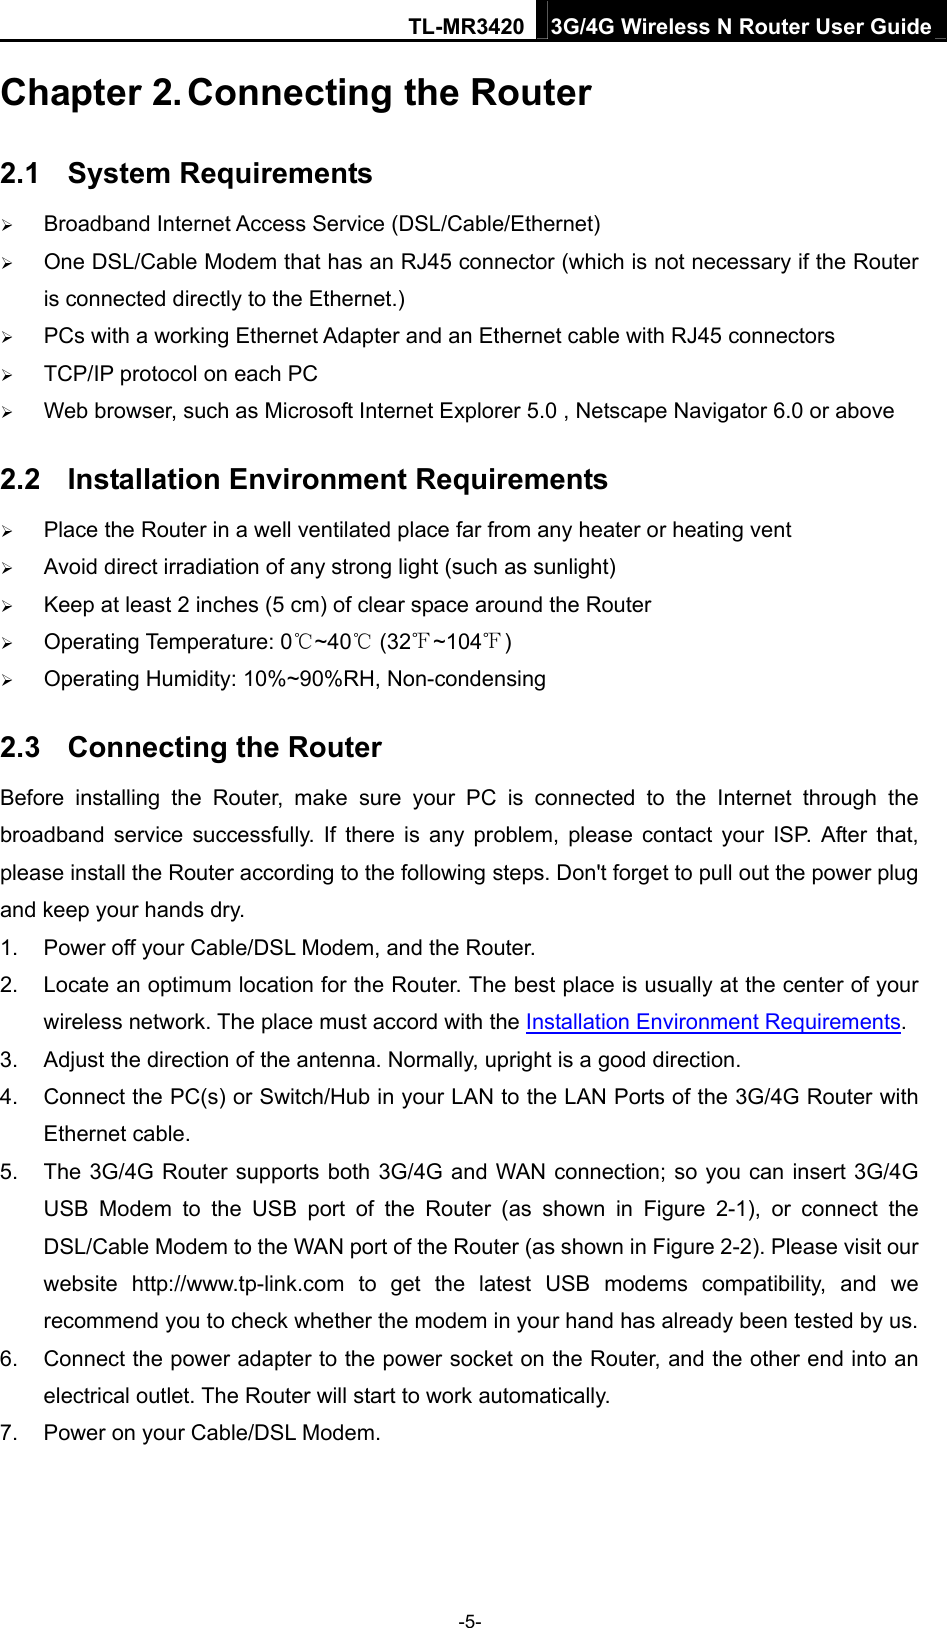 TL-MR3420 3G/4G Wireless N Router User Guide Chapter 2. Connecting the Router 2.1  System Requirements  Broadband Internet Access Service (DSL/Cable/Ethernet)  One DSL/Cable Modem that has an RJ45 connector (which is not necessary if the Router is connected directly to the Ethernet.)  PCs with a working Ethernet Adapter and an Ethernet cable with RJ45 connectors    TCP/IP protocol on each PC  Web browser, such as Microsoft Internet Explorer 5.0 , Netscape Navigator 6.0 or above 2.2  Installation Environment Requirements  Place the Router in a well ventilated place far from any heater or heating vent    Avoid direct irradiation of any strong light (such as sunlight)  Keep at least 2 inches (5 cm) of clear space around the Router  Operating Temperature: 0 ~40  (32 ~104 )   Operating Humidity: 10%~90%RH, Non-condensing 2.3  Connecting the Router Before installing the Router, make sure your PC is connected to the Internet through the broadband service successfully. If there is any problem, please contact your ISP. After that, please install the Router according to the following steps. Don&apos;t forget to pull out the power plug and keep your hands dry. 1.  Power off your Cable/DSL Modem, and the Router.   2.  Locate an optimum location for the Router. The best place is usually at the center of your wireless network. The place must accord with the Installation Environment Requirements.  3.  Adjust the direction of the antenna. Normally, upright is a good direction. 4.  Connect the PC(s) or Switch/Hub in your LAN to the LAN Ports of the 3G/4G Router with Ethernet cable.   5.  The 3G/4G Router supports both 3G/4G and WAN connection; so you can insert 3G/4G USB Modem to the USB port of the Router (as shown in Figure 2-1), or connect the DSL/Cable Modem to the WAN port of the Router (as shown in Figure 2-2). Please visit our website  http://www.tp-link.com to get the latest USB modems compatibility, and we recommend you to check whether the modem in your hand has already been tested by us. 6.  Connect the power adapter to the power socket on the Router, and the other end into an electrical outlet. The Router will start to work automatically. 7.  Power on your Cable/DSL Modem. -5- 